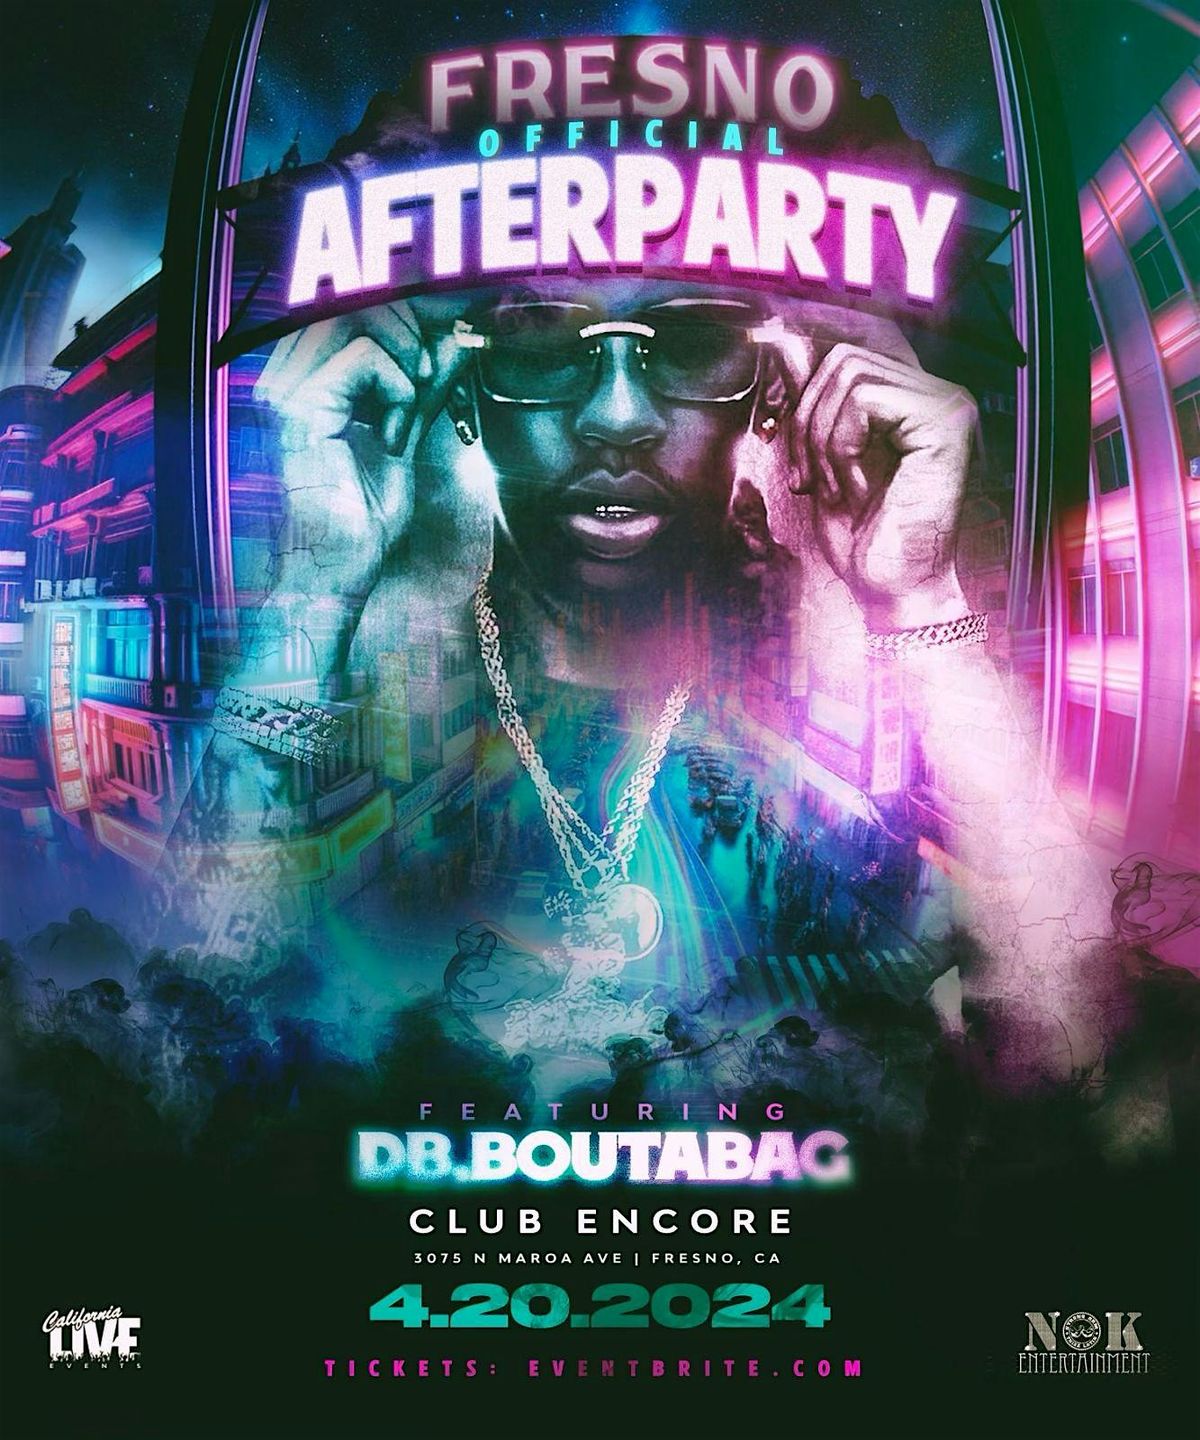 CLUB ENCORE PRESENTS: DB.BOUTABAG LIVE IN FRESNO - 21&OVER